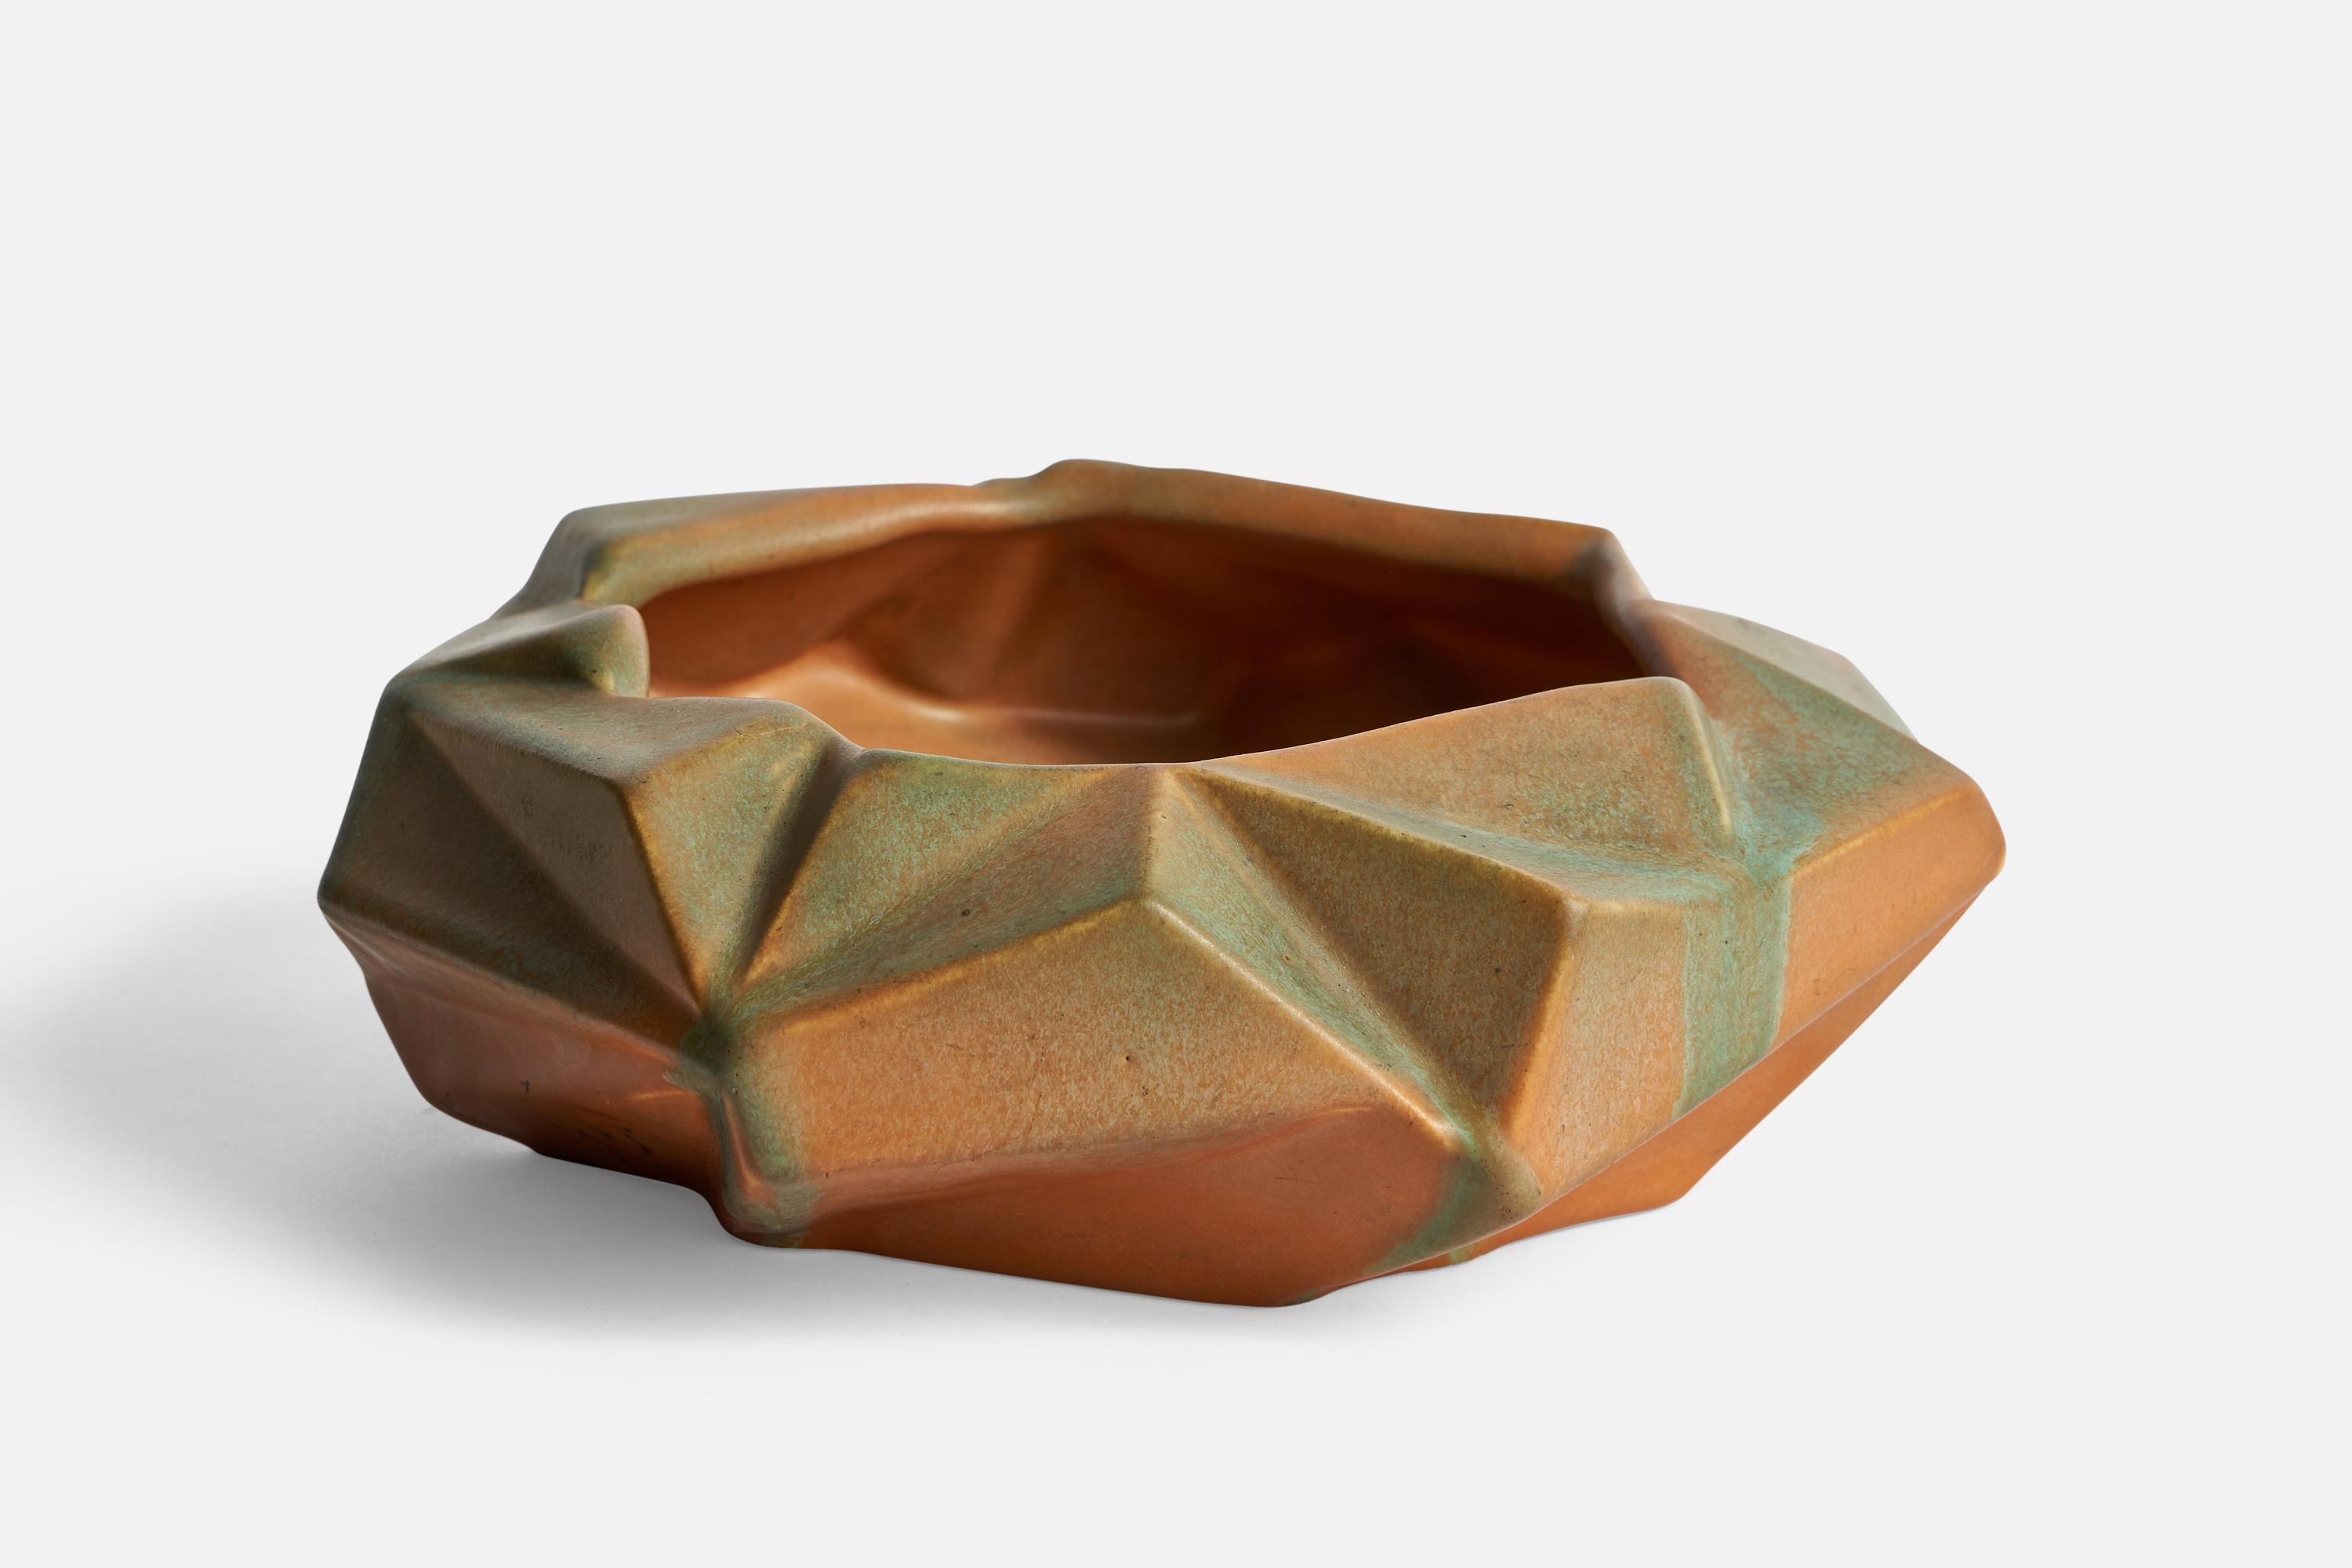 A freeform bowl designed by Reuben Haley and produced by Muncie Pottery, USA, 1930s.